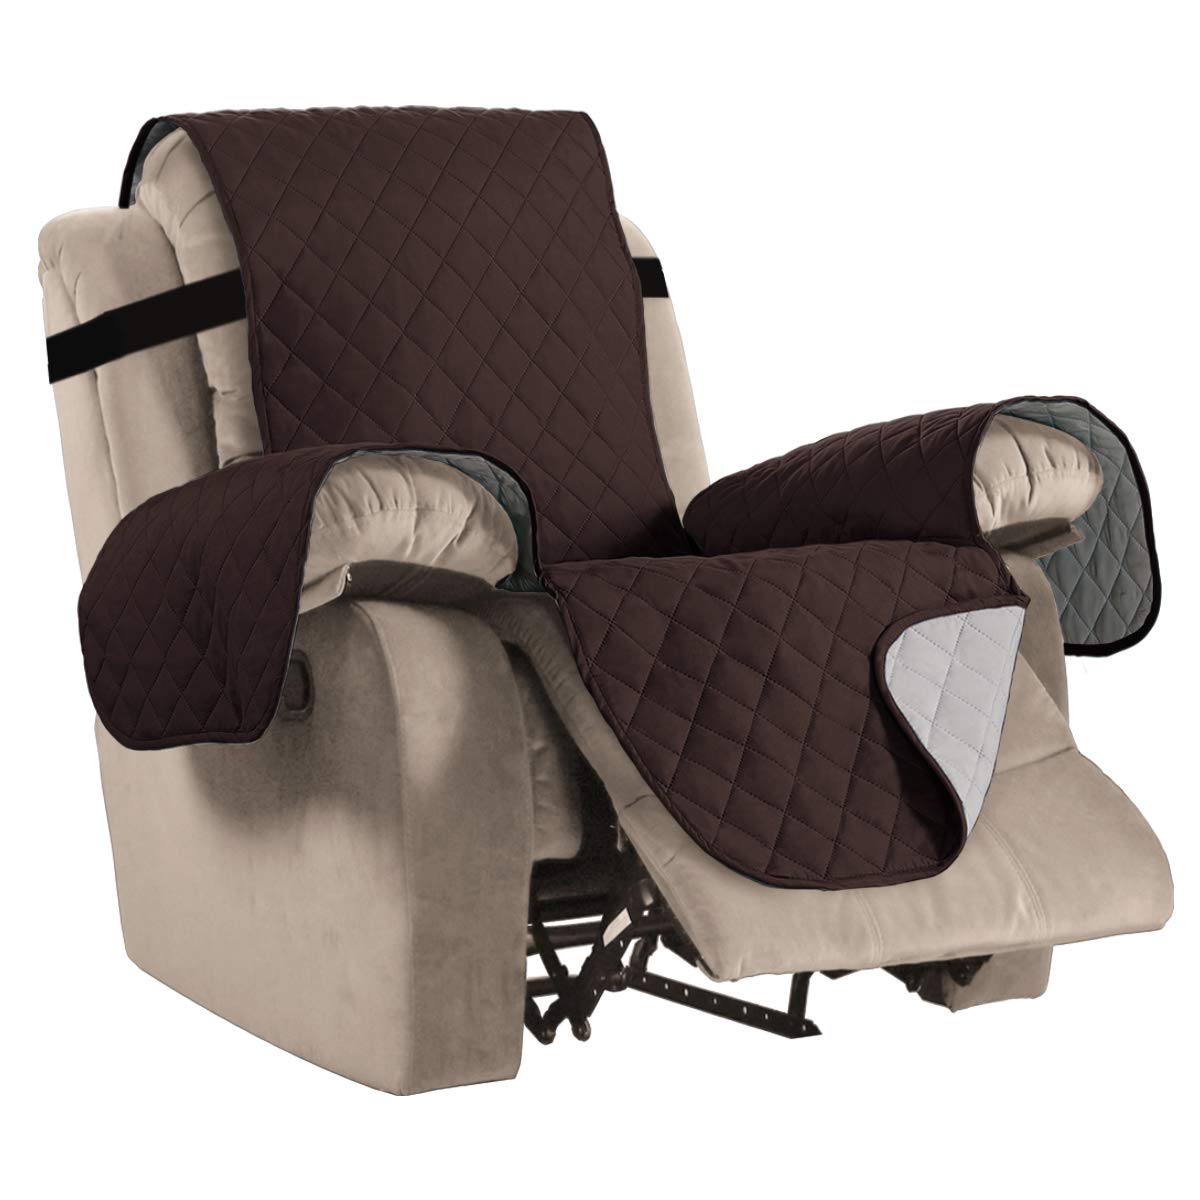 Amazon: 50% OFF Reversible Quilted Recliner Cover (Also 50% OFF Loveseat Cover) $11